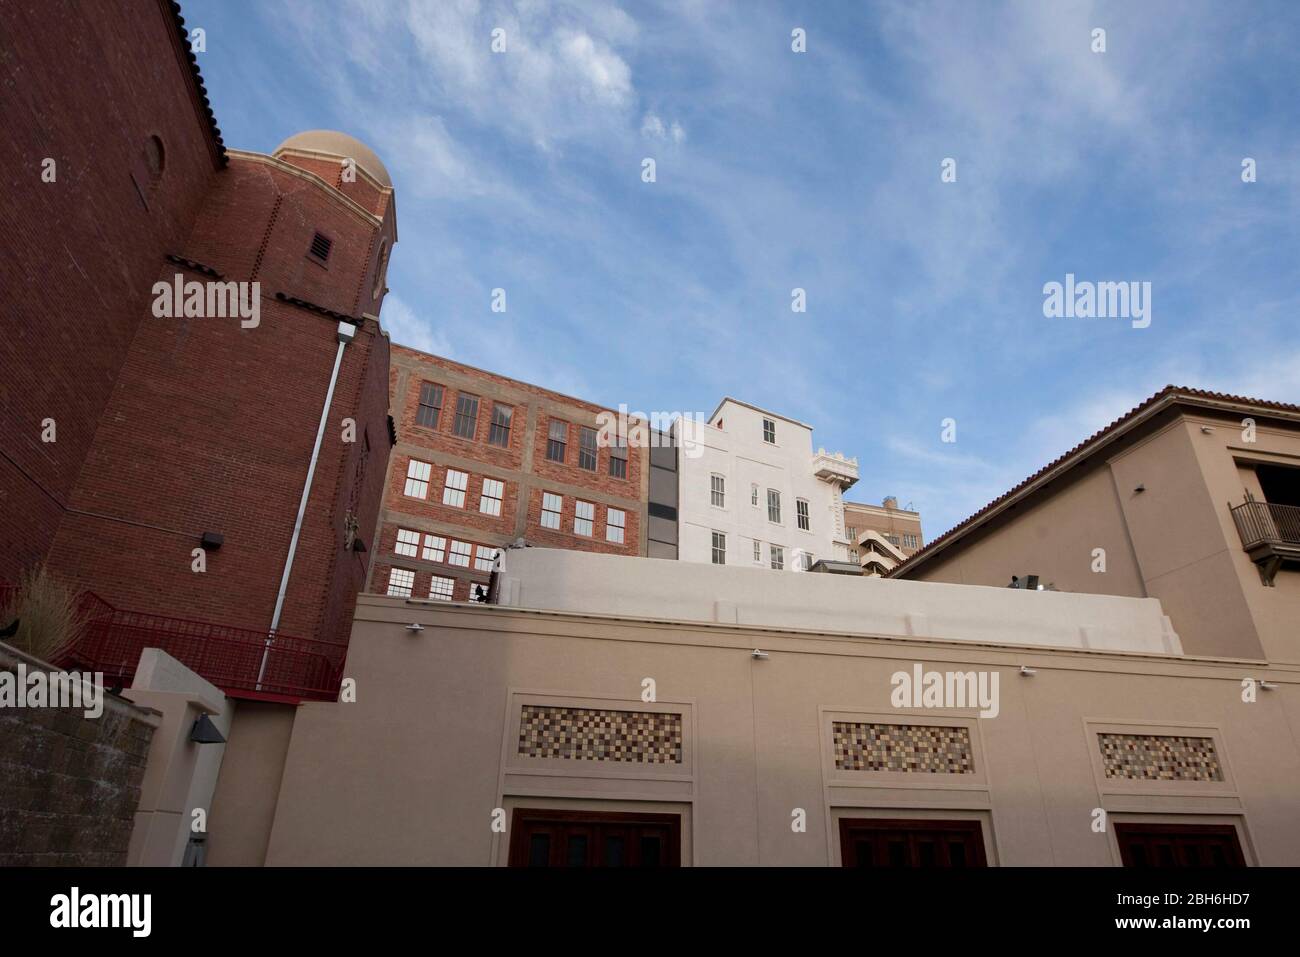 El Paso, Texas May 14, 2009: Scenes from the arts district downtown El Paso, TX showing a portion of the Plaza Theater's 1930-era complex (foreground) with older buildings behind.  ©Bob Daemmrich Stock Photo